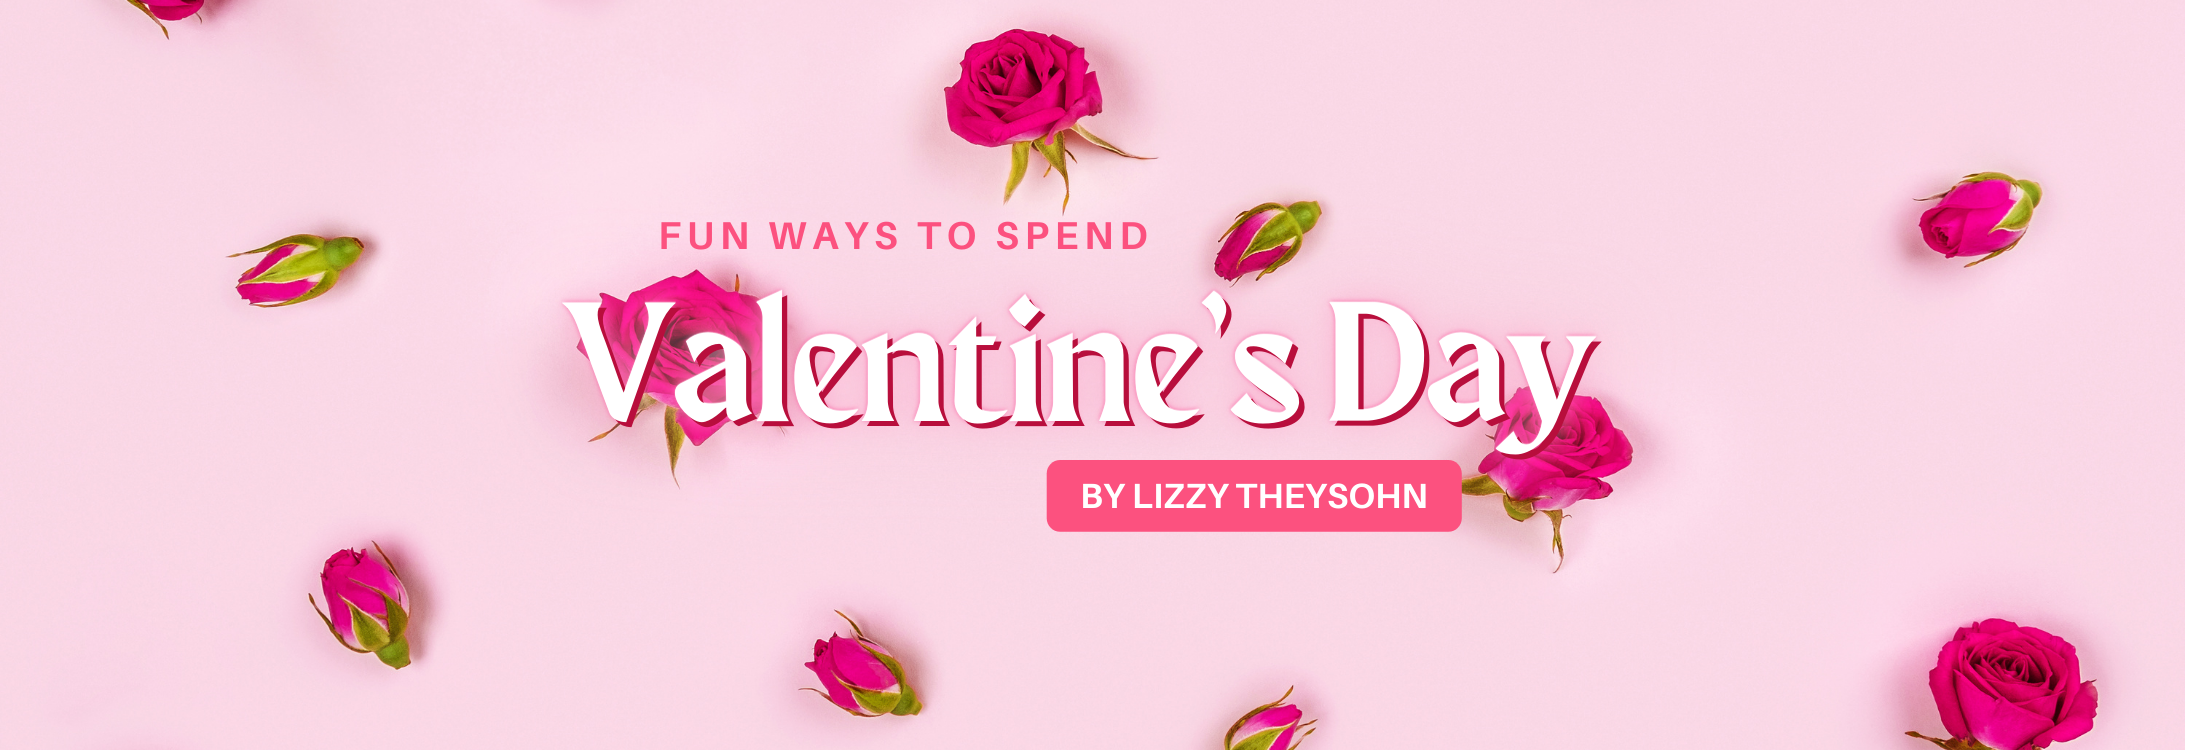 Fun Ways to Spend Valentine's Day blog cover